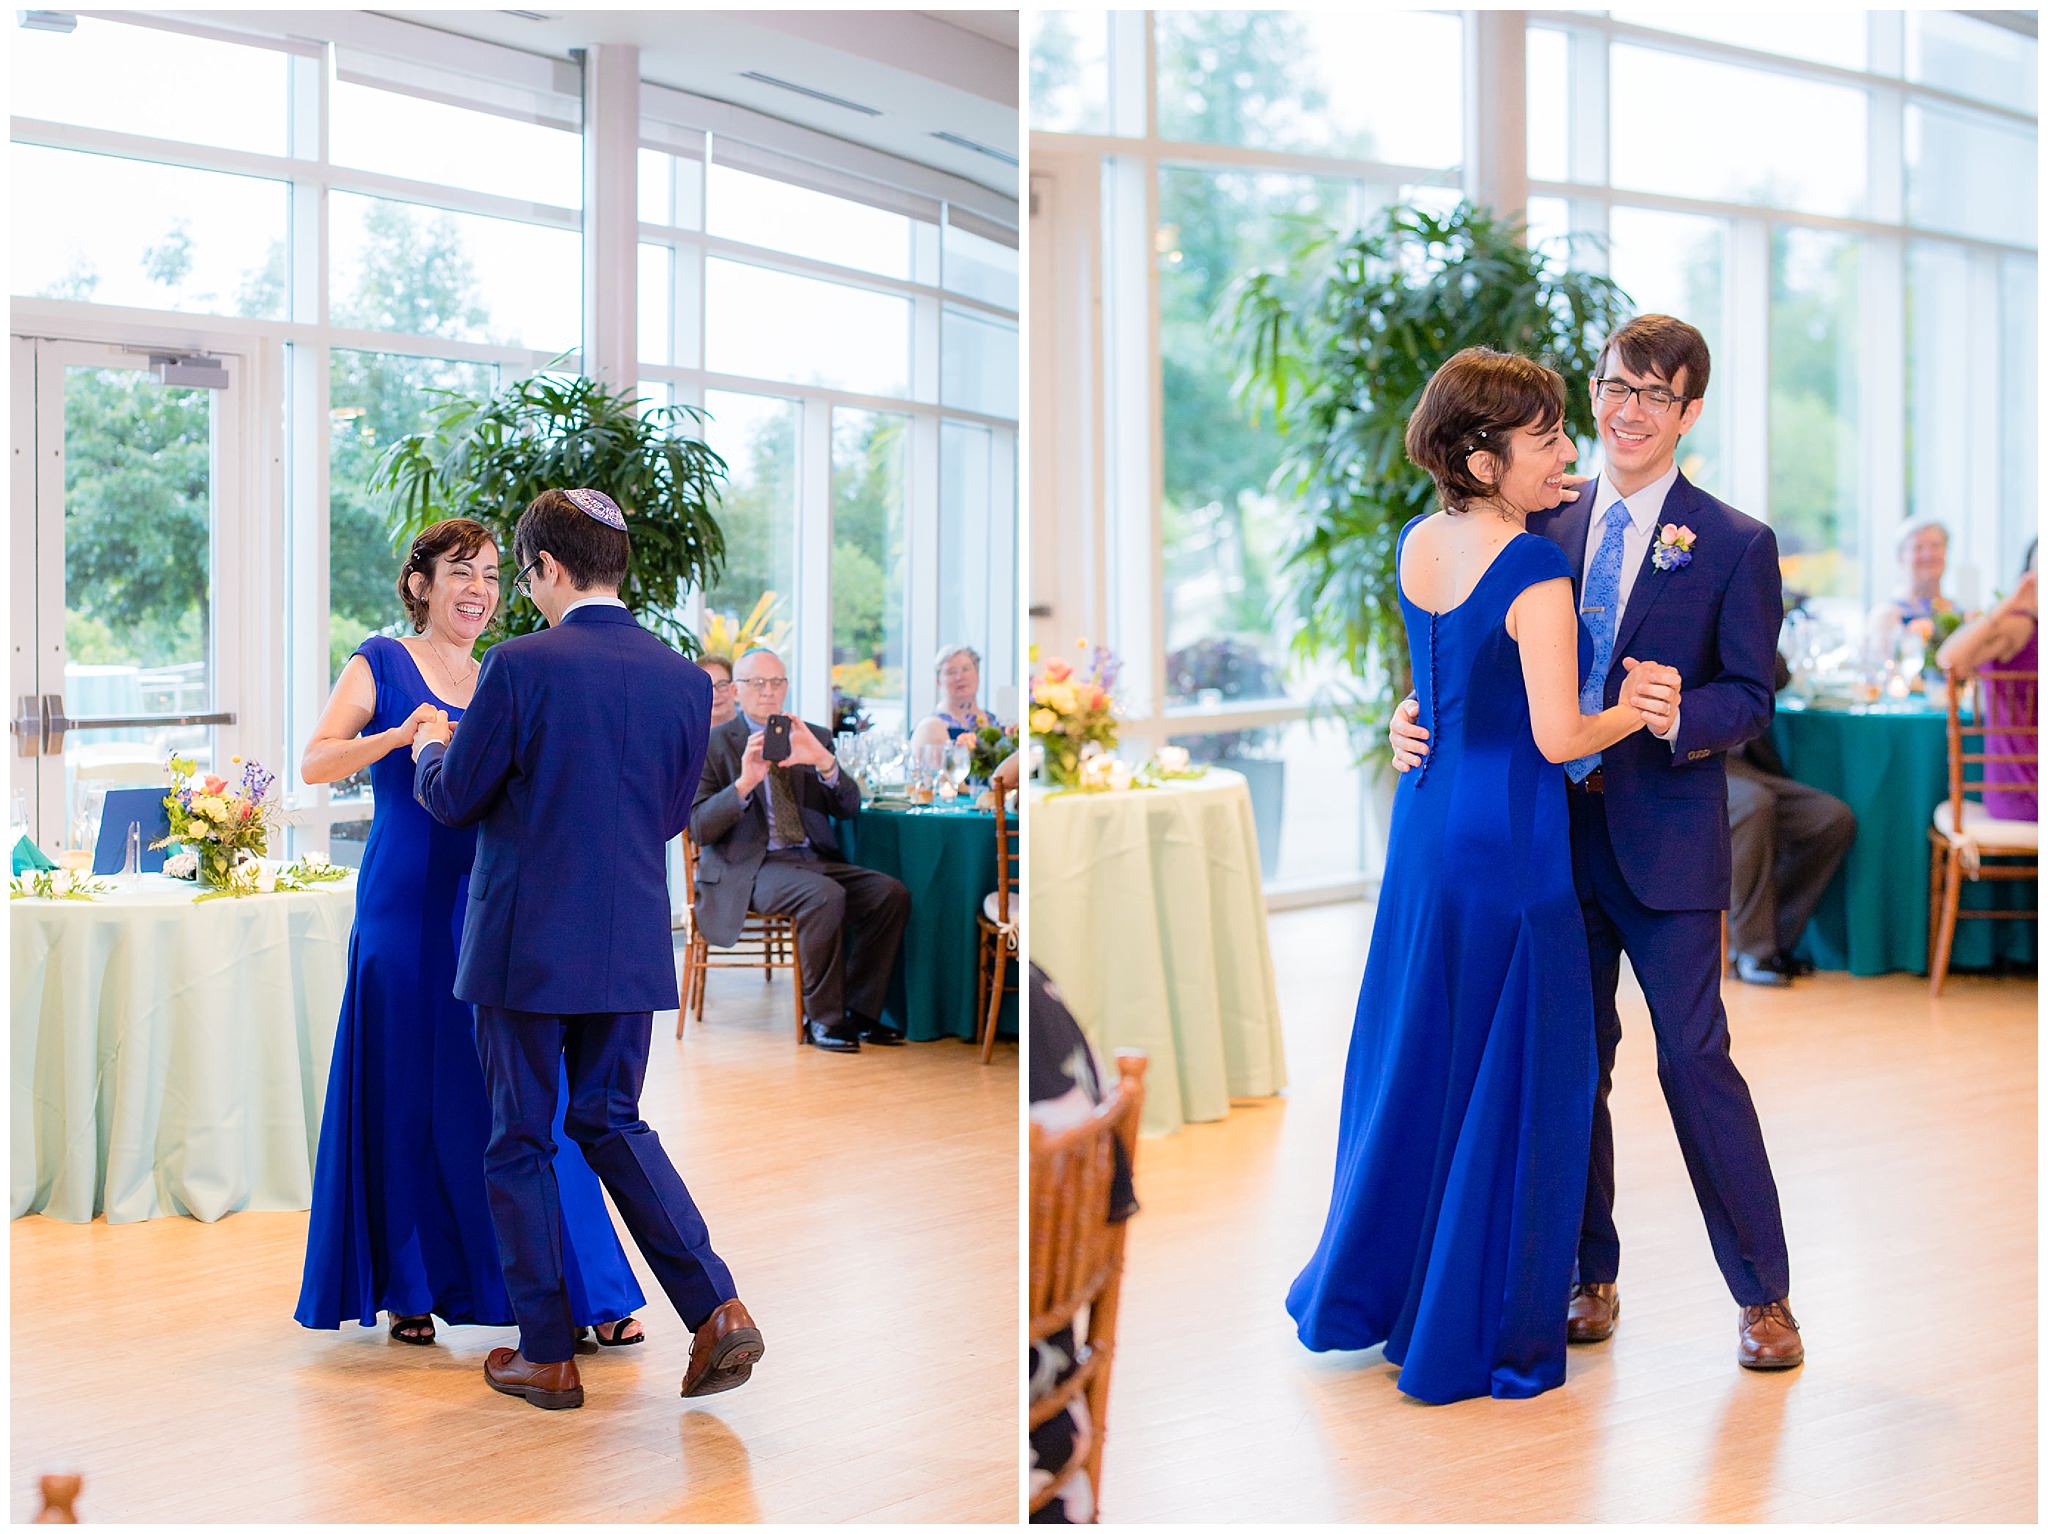 Mother-son dance at a Phipps Conservatory wedding reception